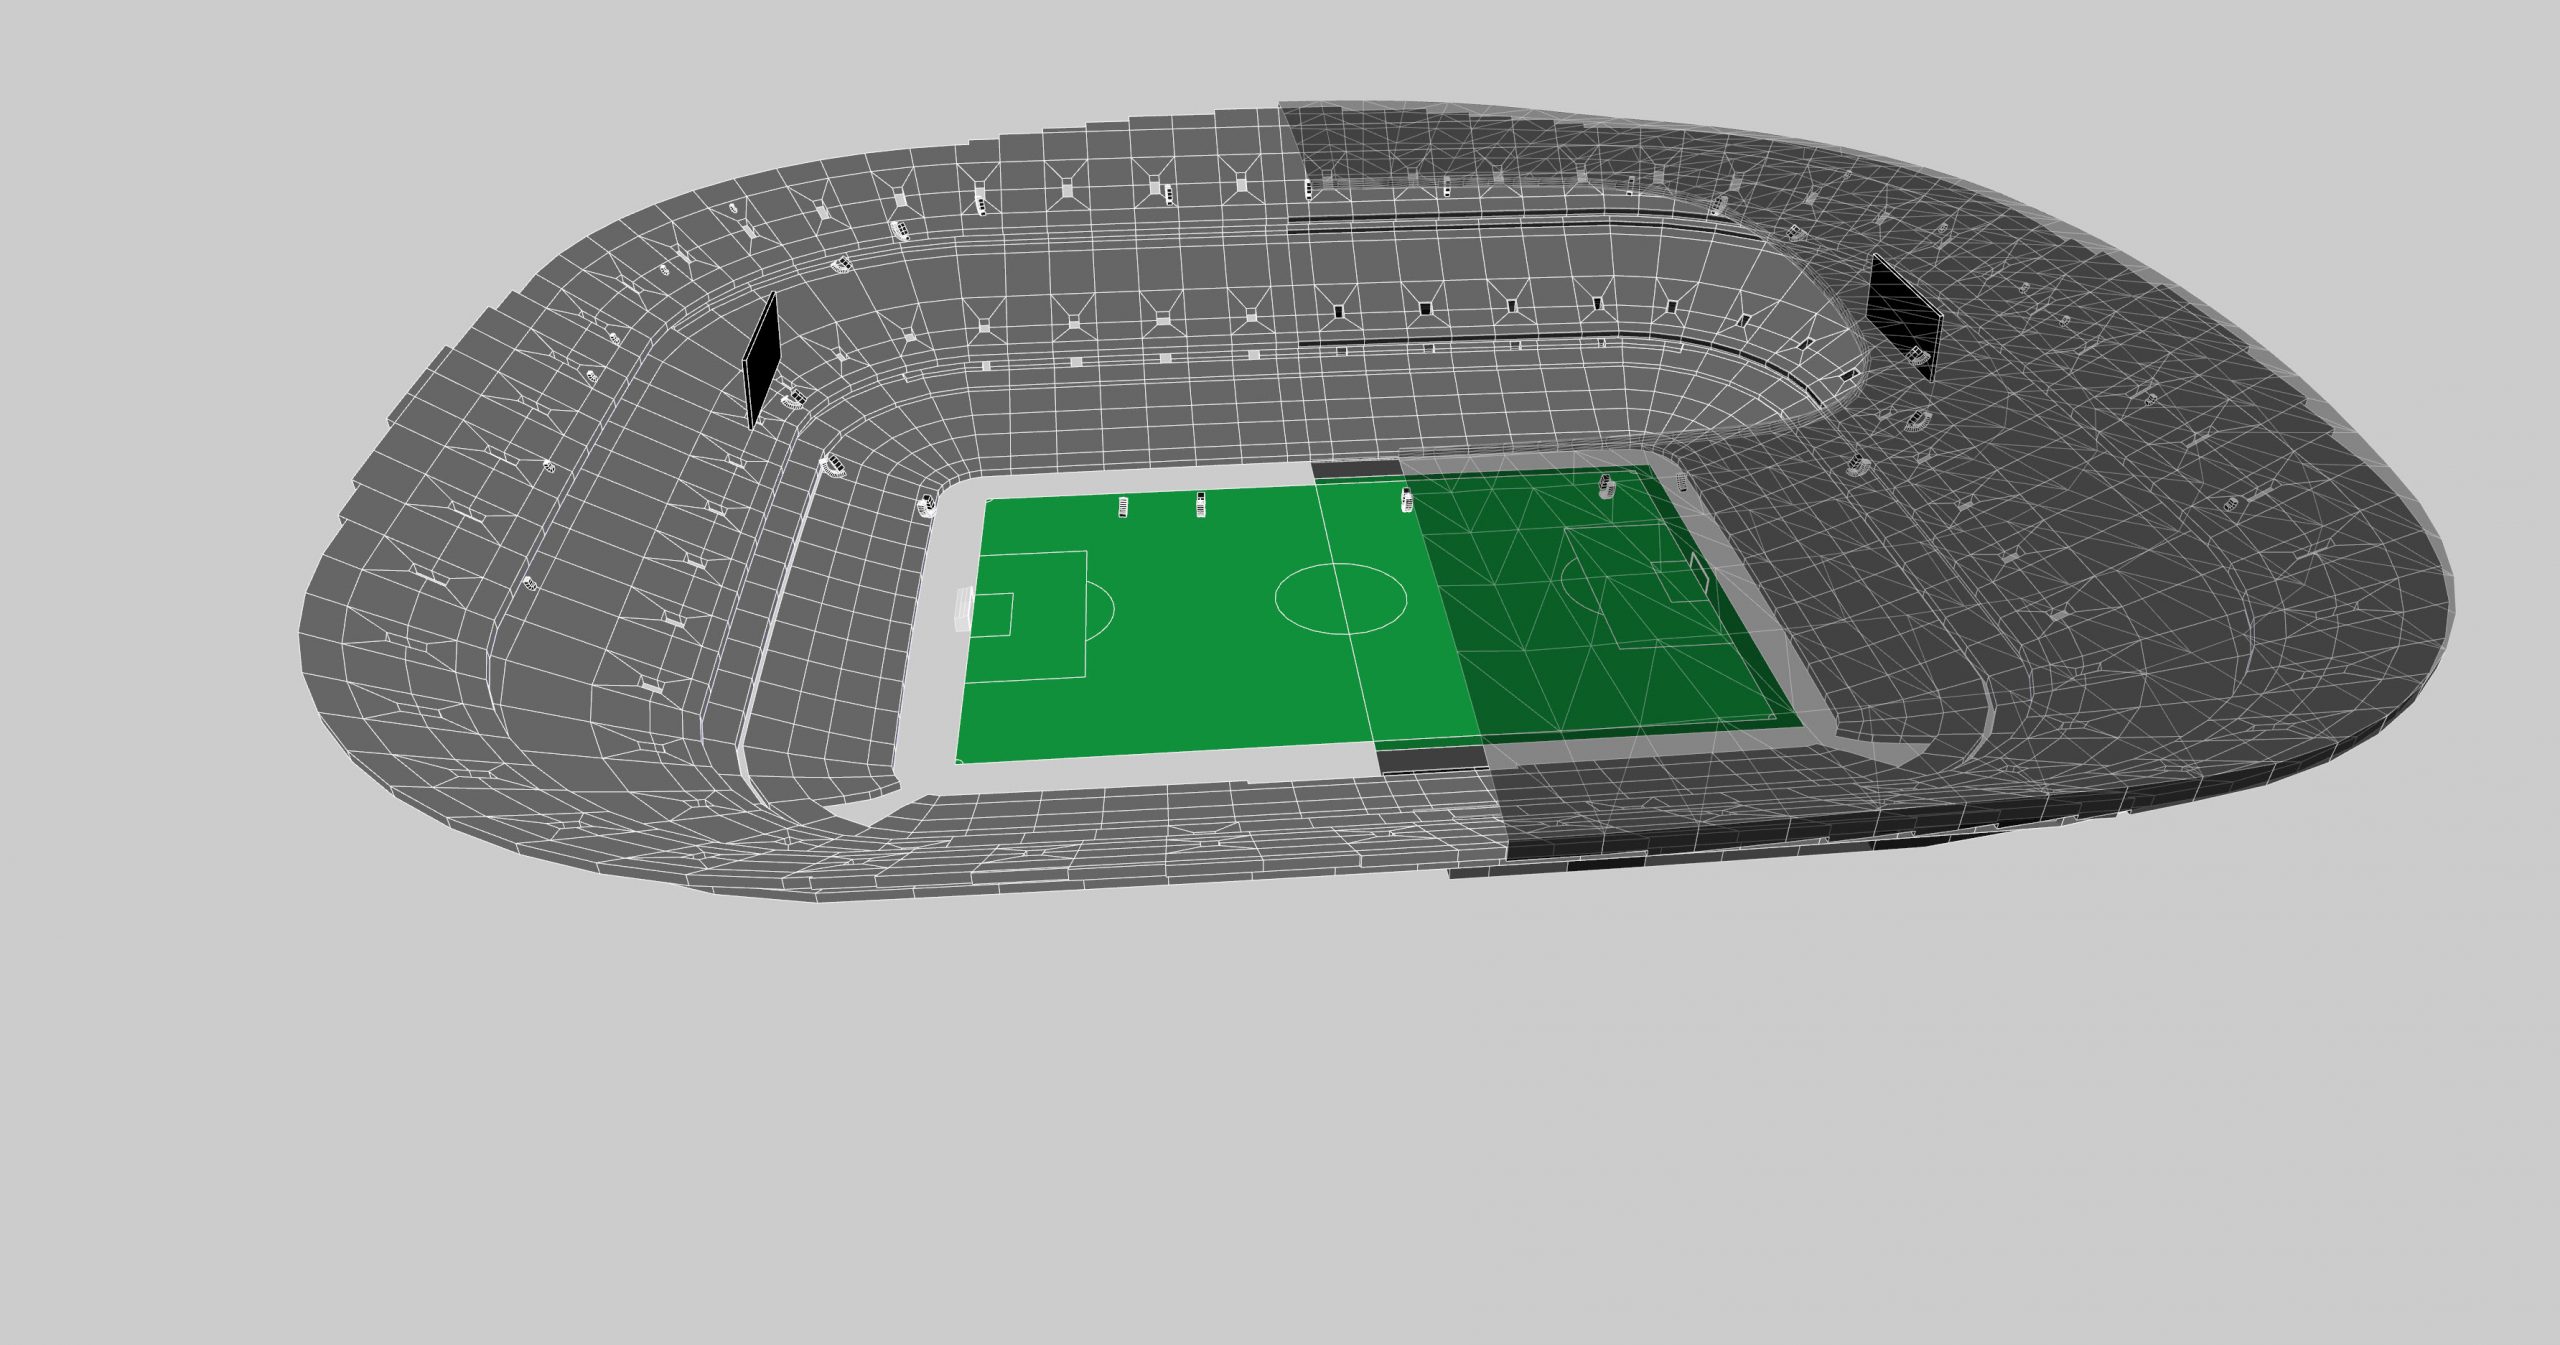 3D Model of sound system set up by L-Acoustics at the Allianz Arena Football Stadium